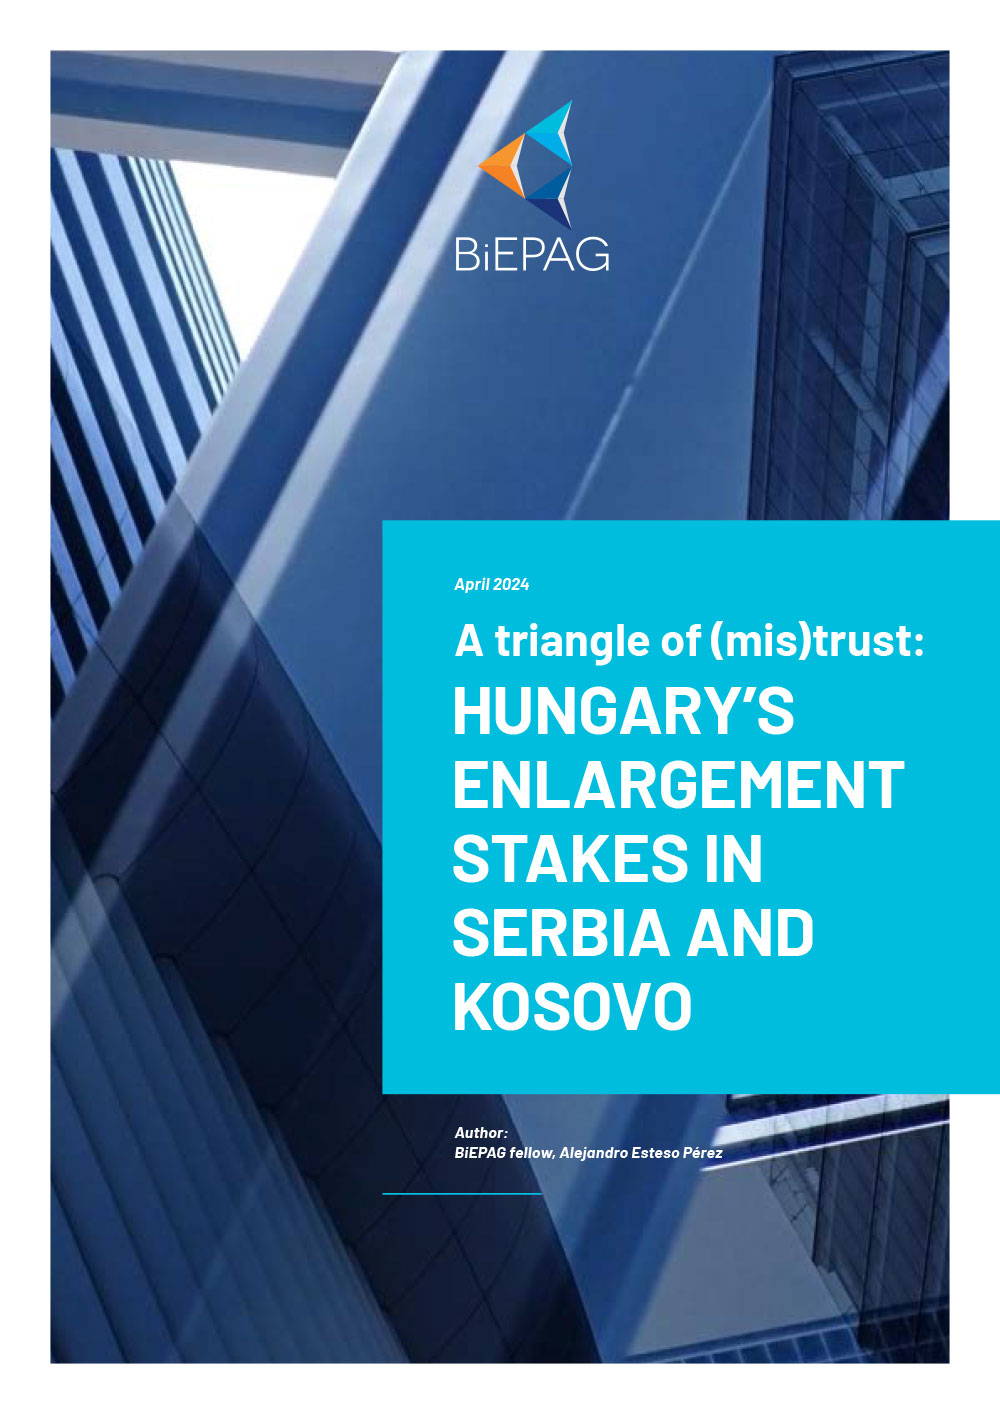 Policy Brief - A triangle of (mis)trust - Hungary’s enlargement stakes in Serbia and Kosovo